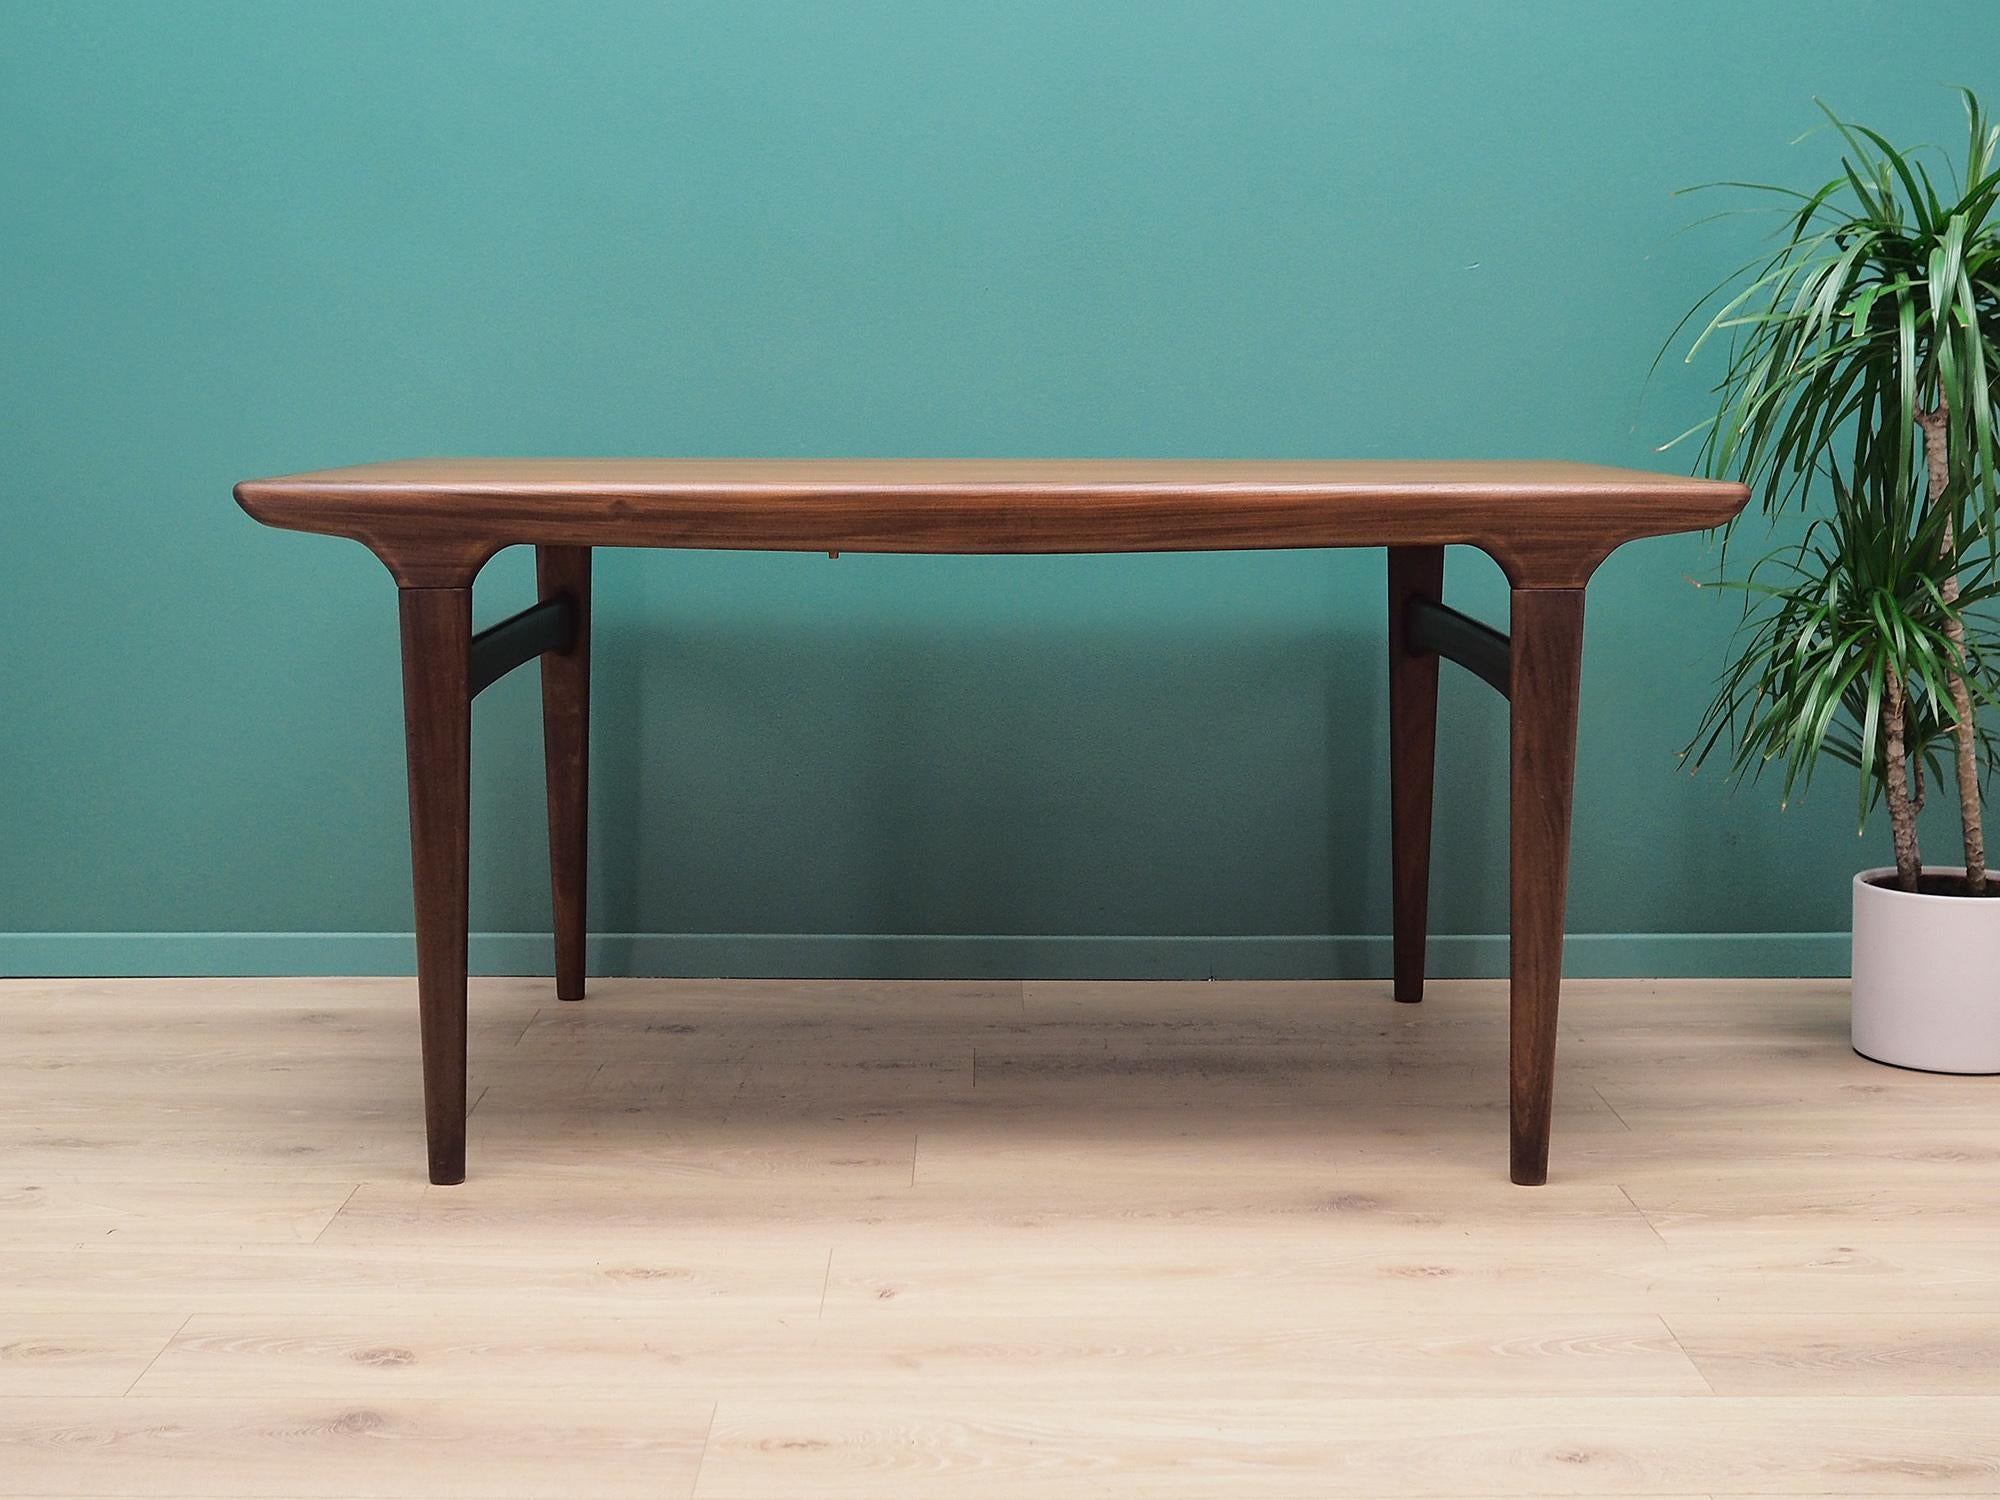 Table made in the 1970s. It was produced by the famous Danish factory Uldum. Designed by the Danish design icon Johannes Andersen.

The structure and table top are covered with teak veneer. The legs are made of solid teak wood, perfectly